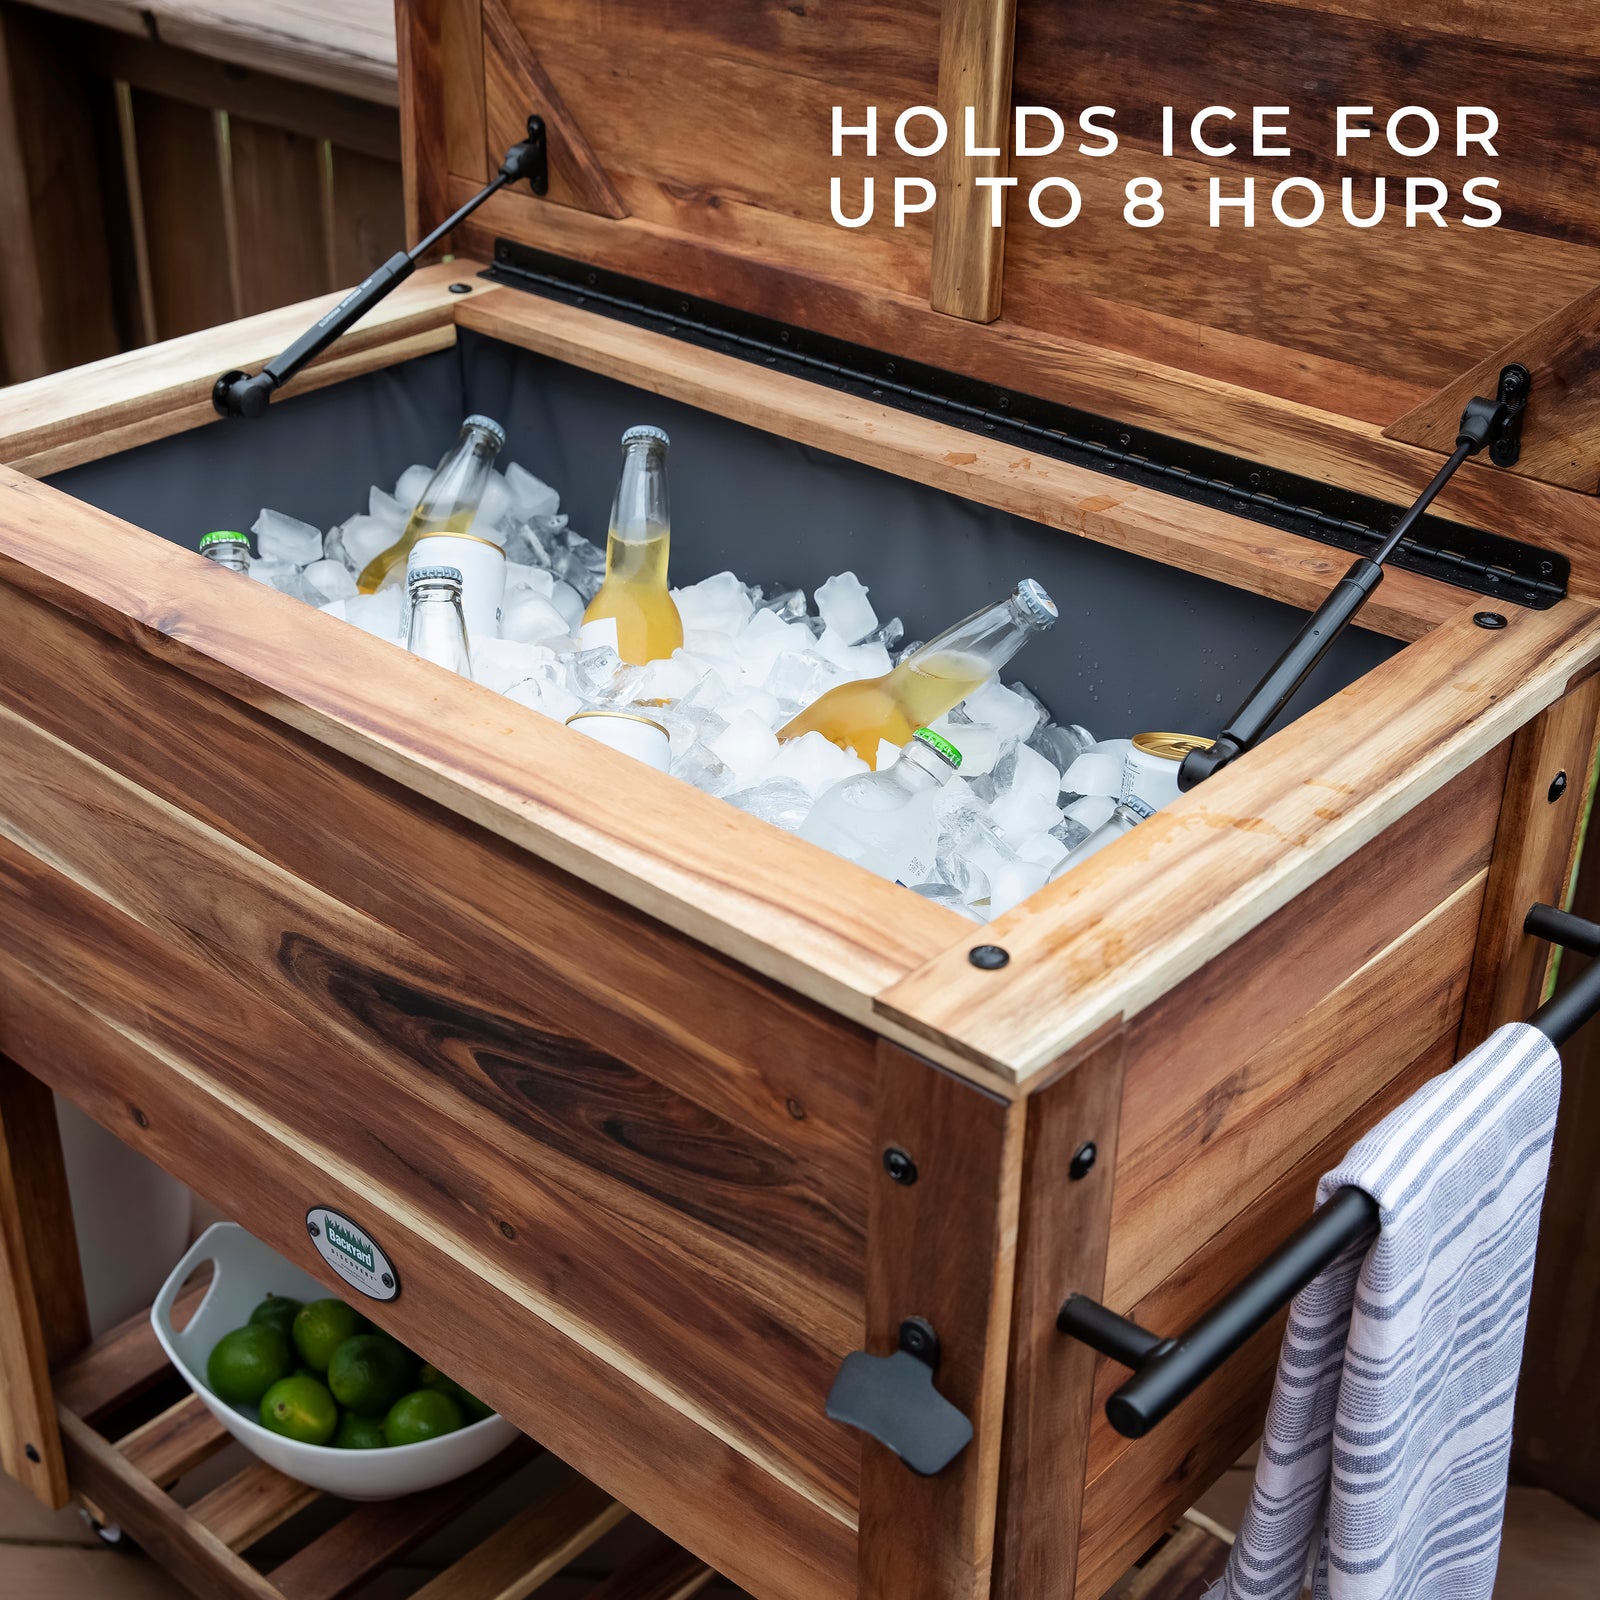 Cooler Shock Ice Packs Keep Coolers and Ice Chests Cold for Days